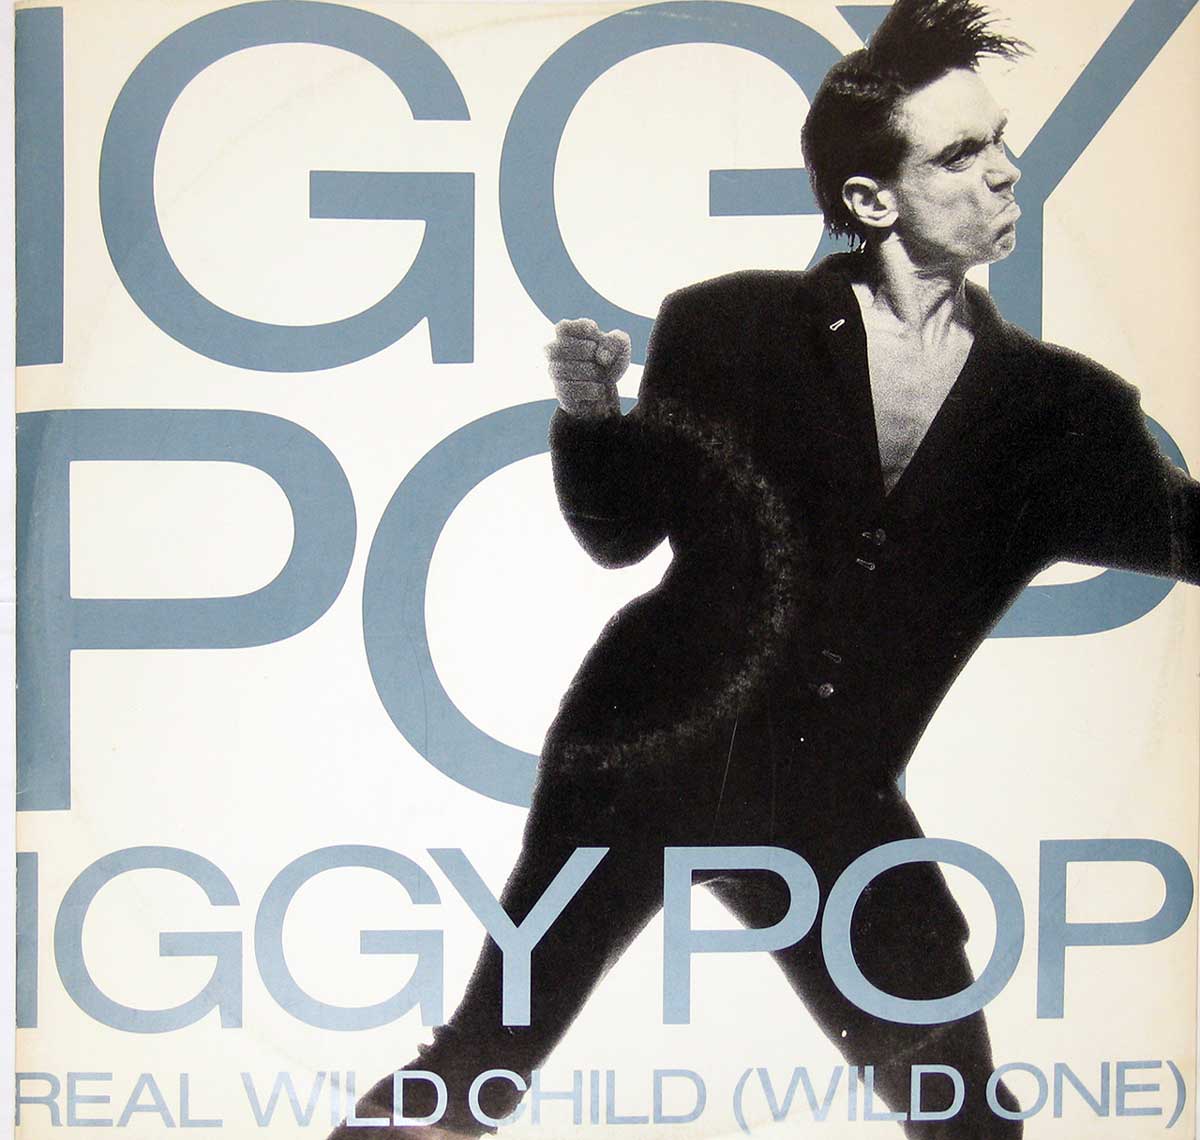 large album front cover photo of: IGGY POP  REAL WILD CHILD  